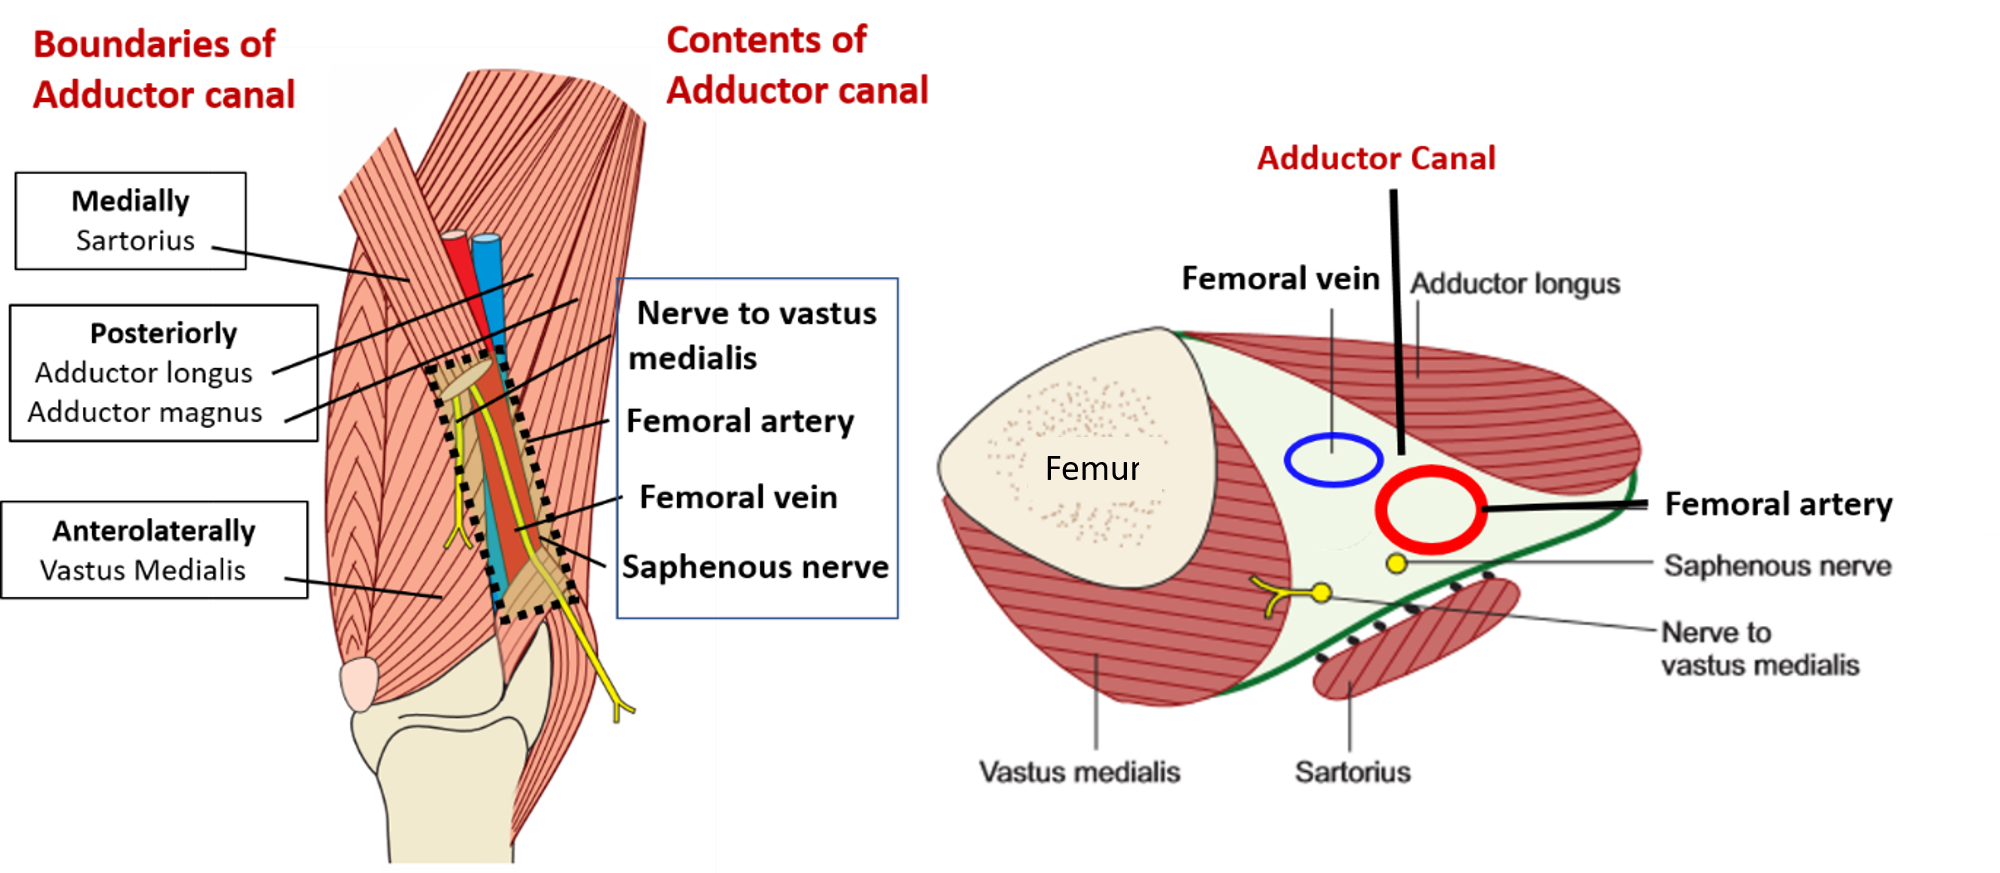 boundaries and contents of adductor canal